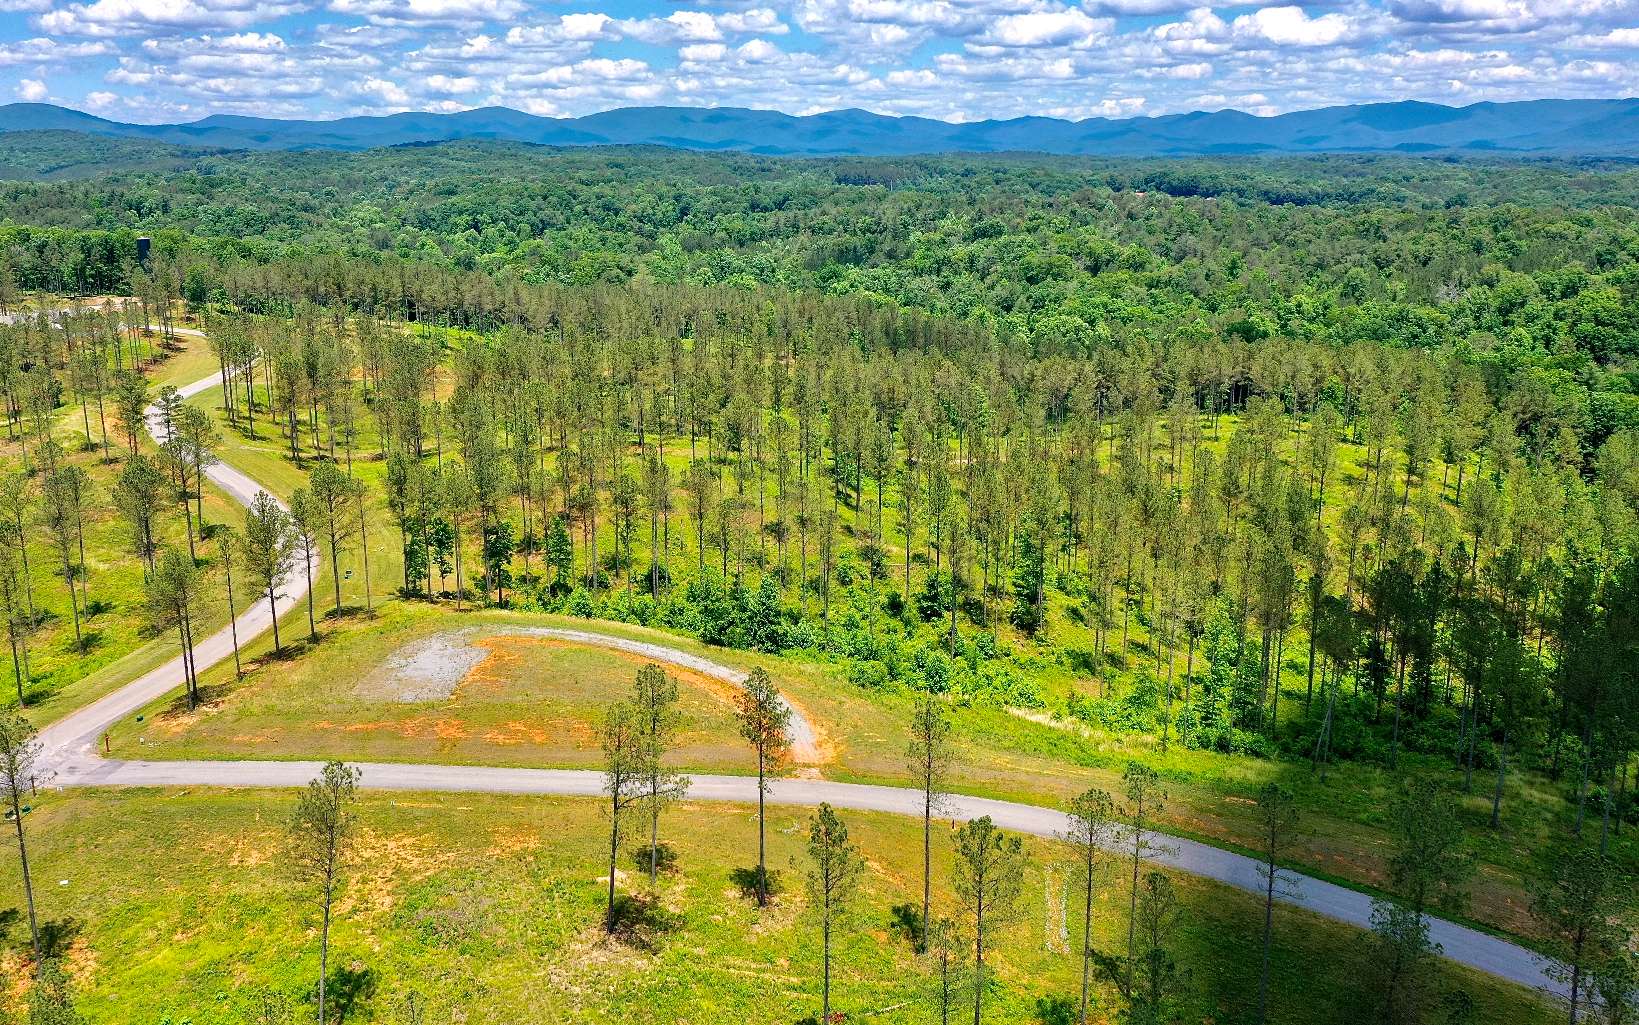 Build your DREAM HOME in this majestic mountain setting. With 3.65 acres and distant long range mountain views you have the room to create your North Ga oasis. Conveniently located just ten minute west of downtown Ellijay, restaurants, shopping, and activities are just a short drive away. Once you are inside of this gated community you will find, paved roads, underground utilities, a lodge, clubhouse, restaurant, park, river access, fishing, glamping sites, kayak storage, and several campfire sites that are available to you in High River. You CAN have it all in the beautiful mountain/river community. The HOA allows short term rentals.